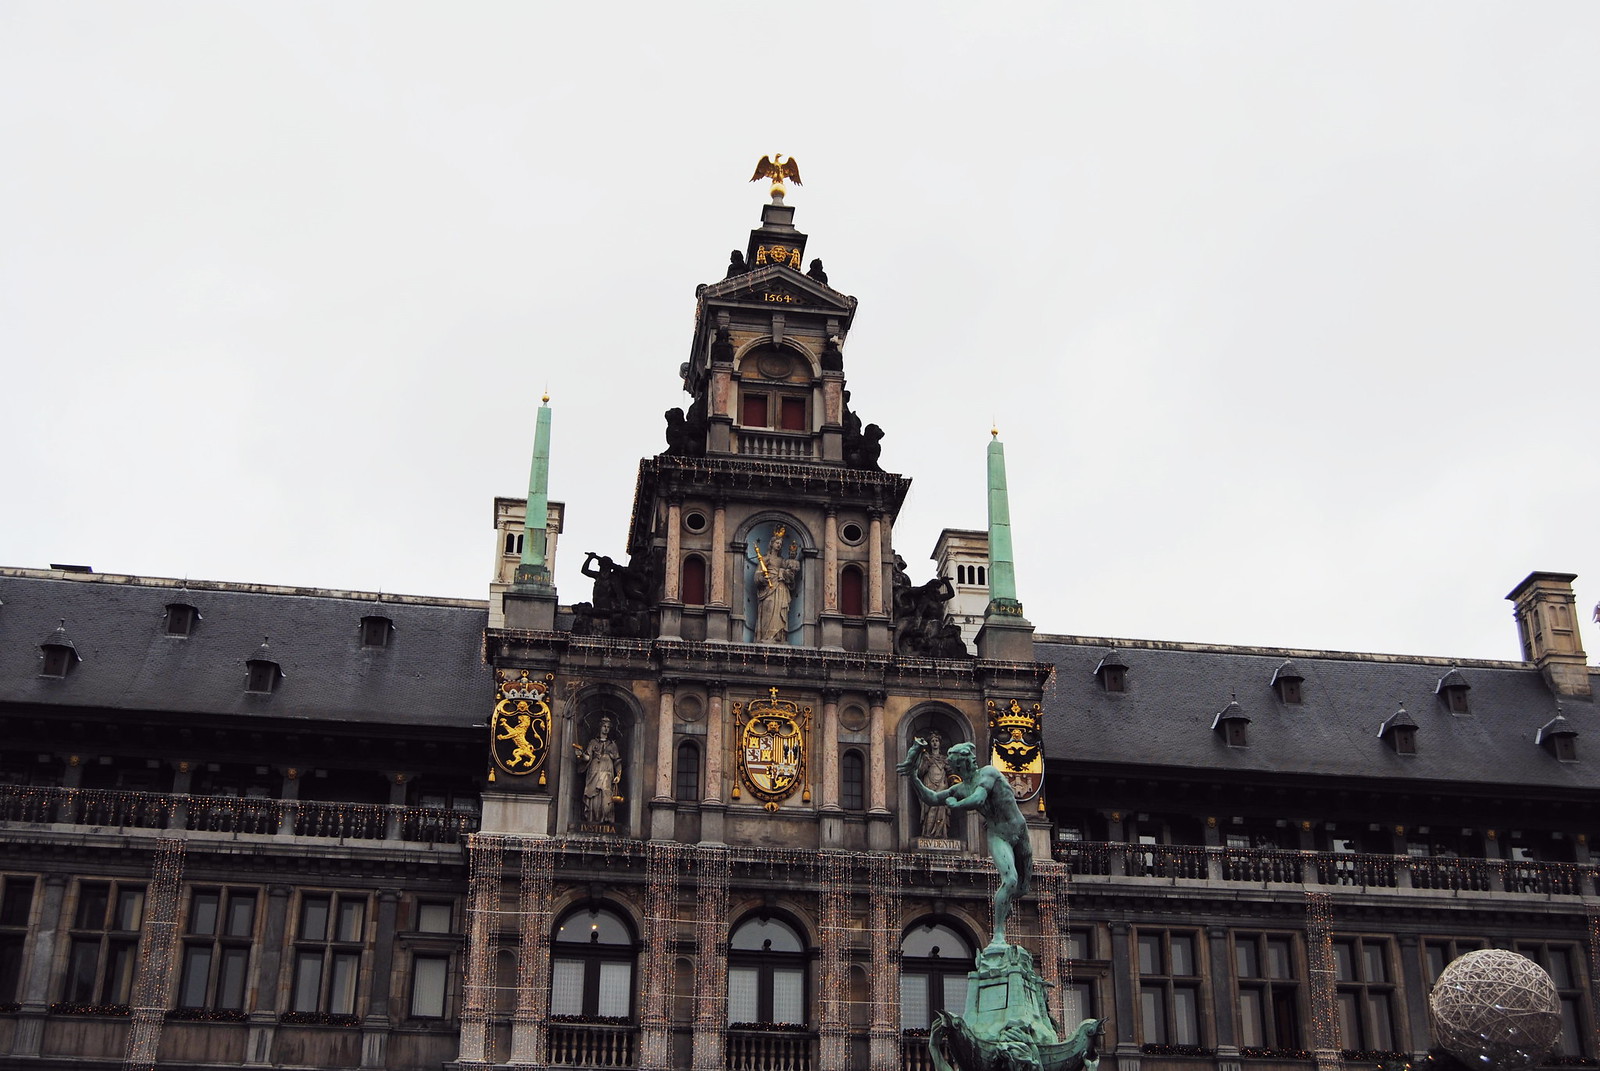 A view of the Antwerp City Hall (facade).